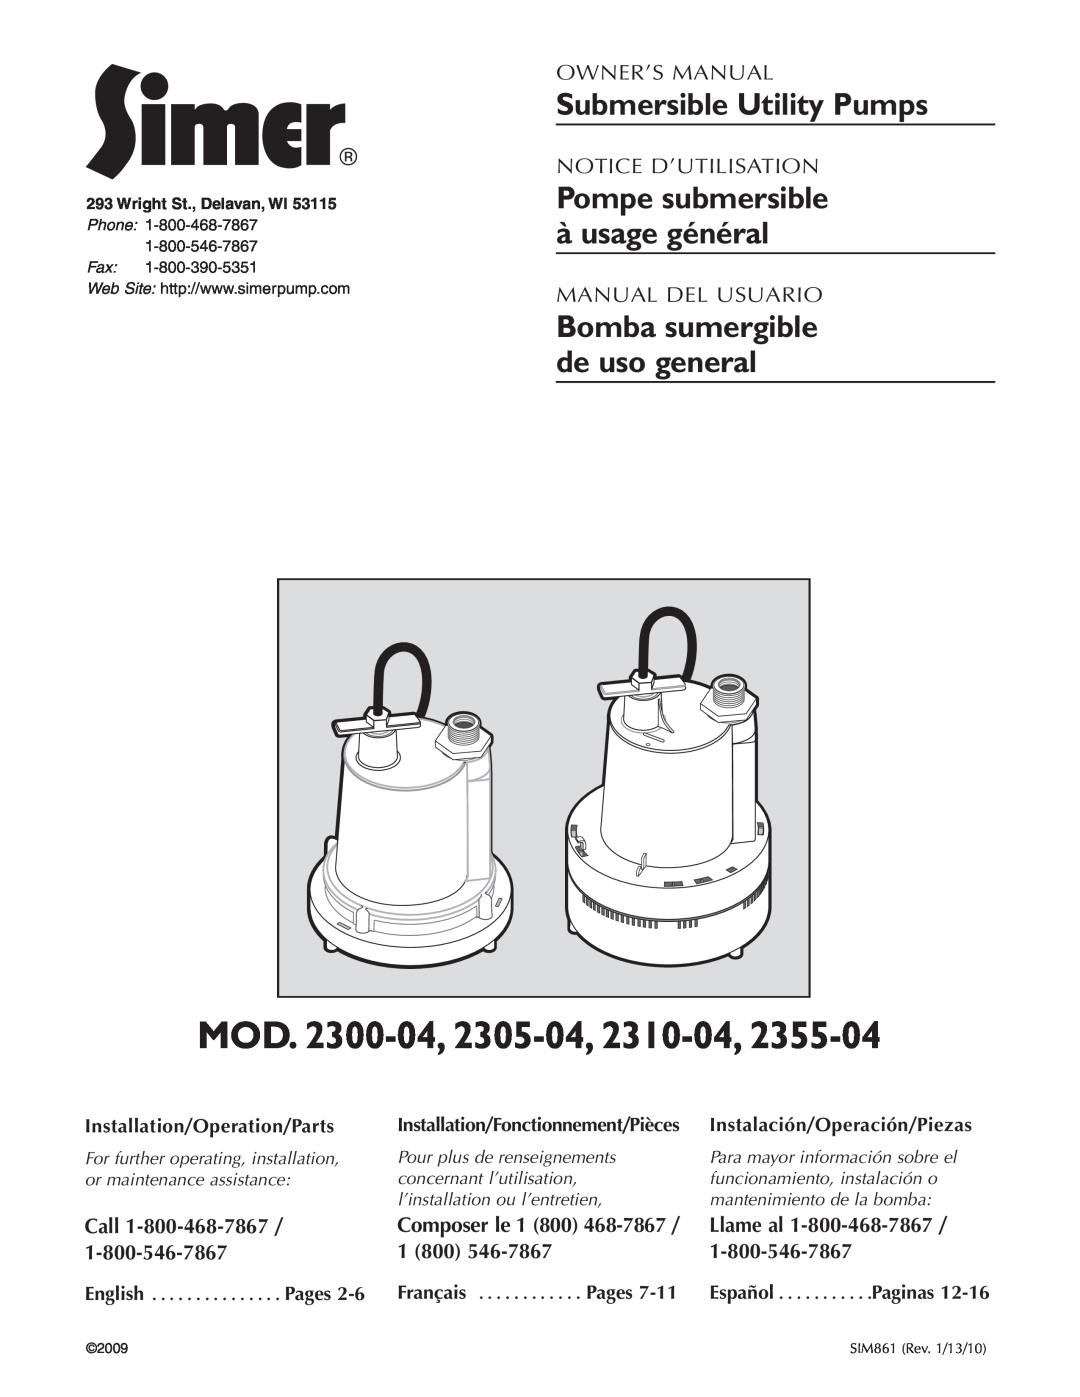 Simer Pumps 2305-04 owner manual Submersible Utility Pumps, Installation/Operation/Parts, Call, Composer le, Pages, 1 800 